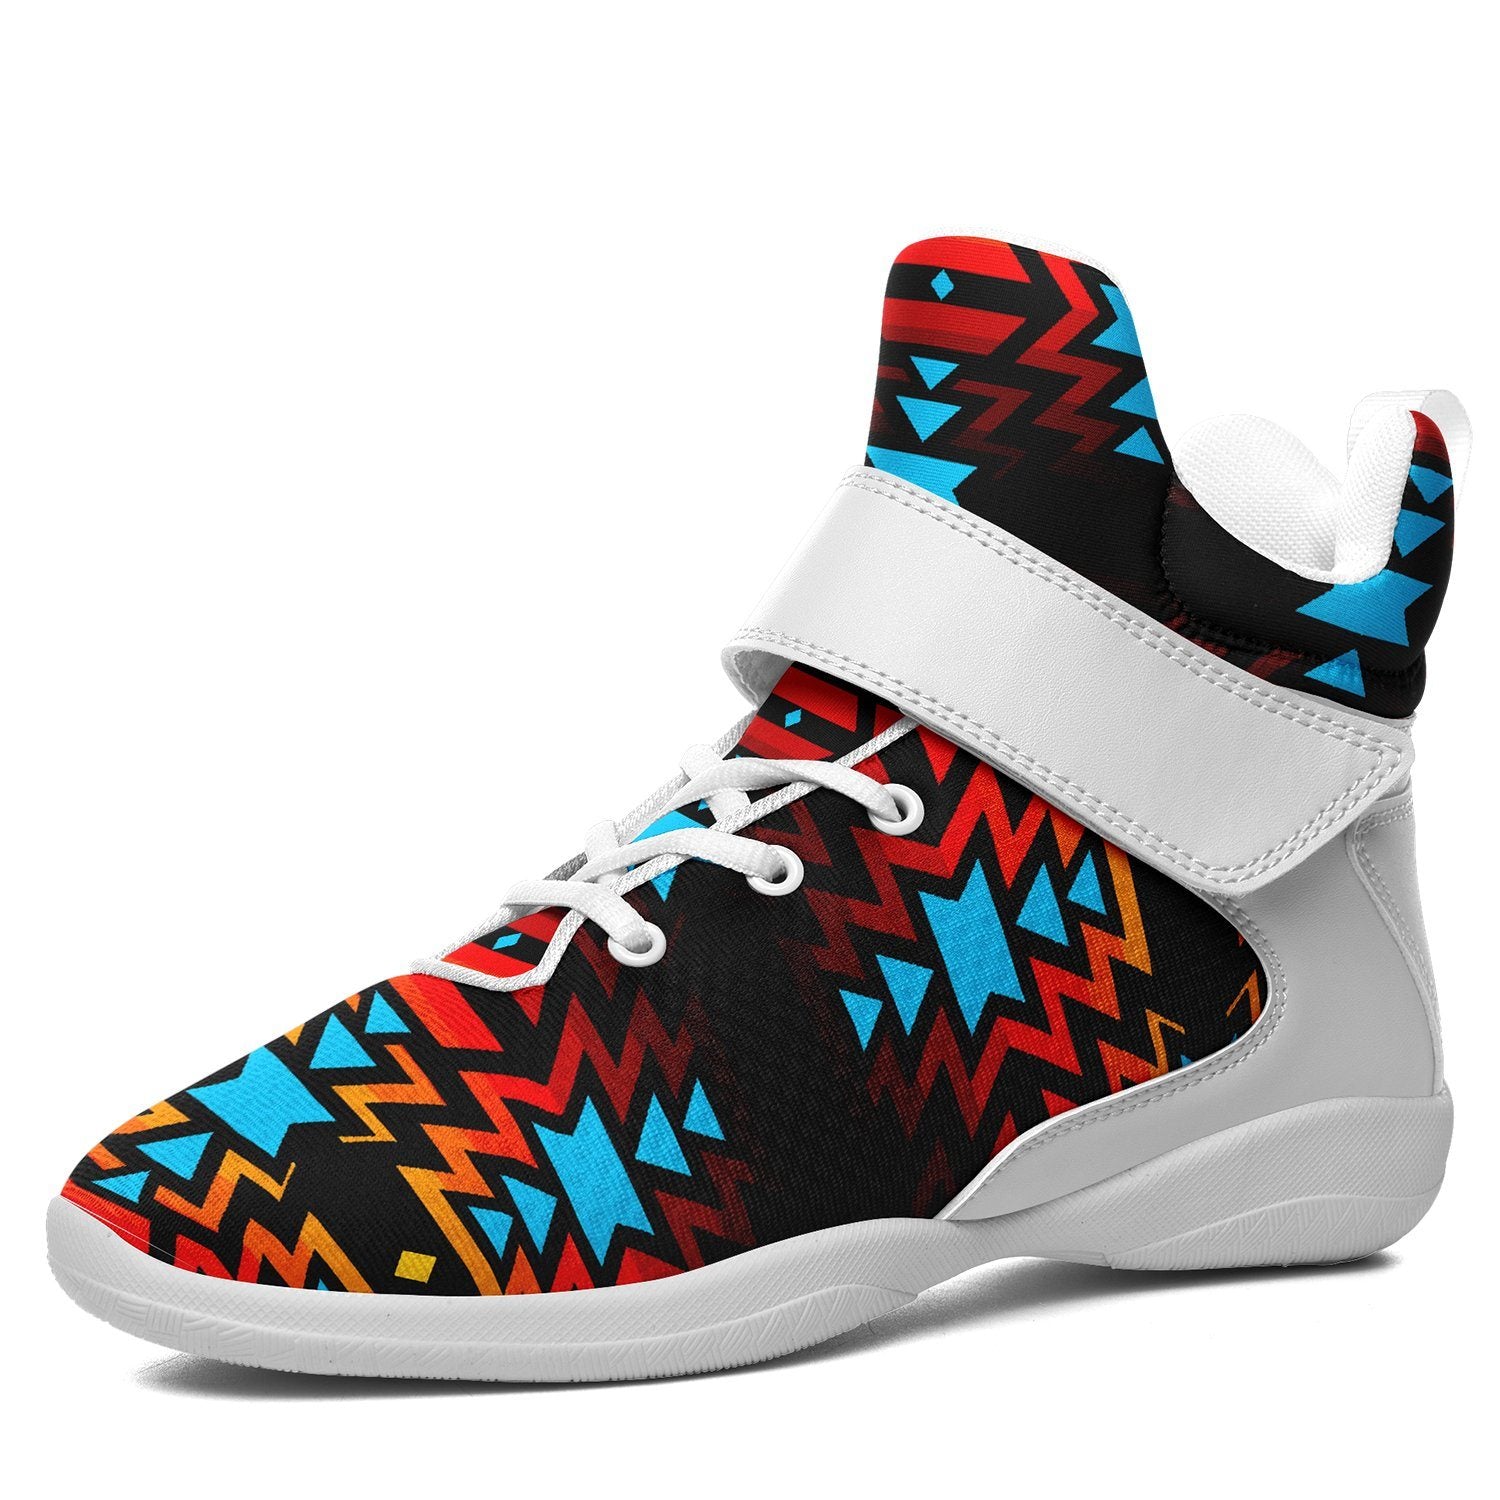 Black Fire and Turquoise Ipottaa Basketball / Sport High Top Shoes 49 Dzine US Women 4.5 / US Youth 3.5 / EUR 35 White Sole with White Strap 